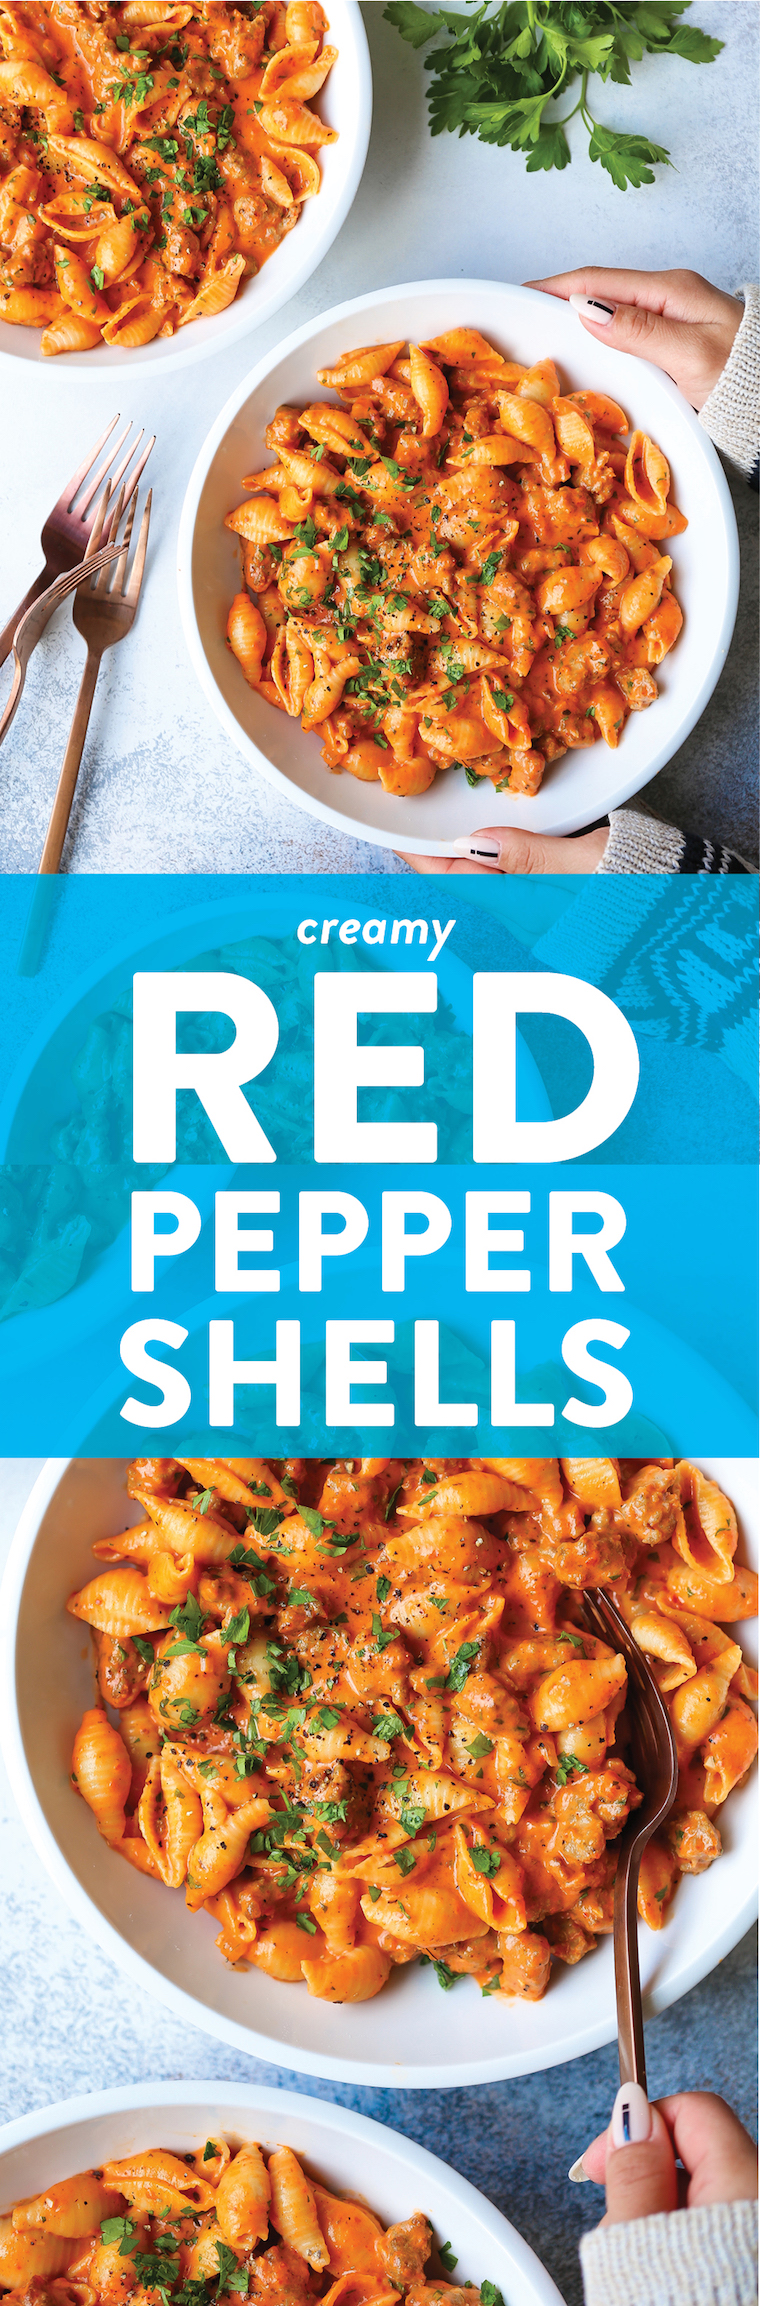 Creamy Red Pepper Shells - Crumbled Italian sausage, Parmesan, basil, and the most EPIC red pepper cream sauce! So creamy, so so good.